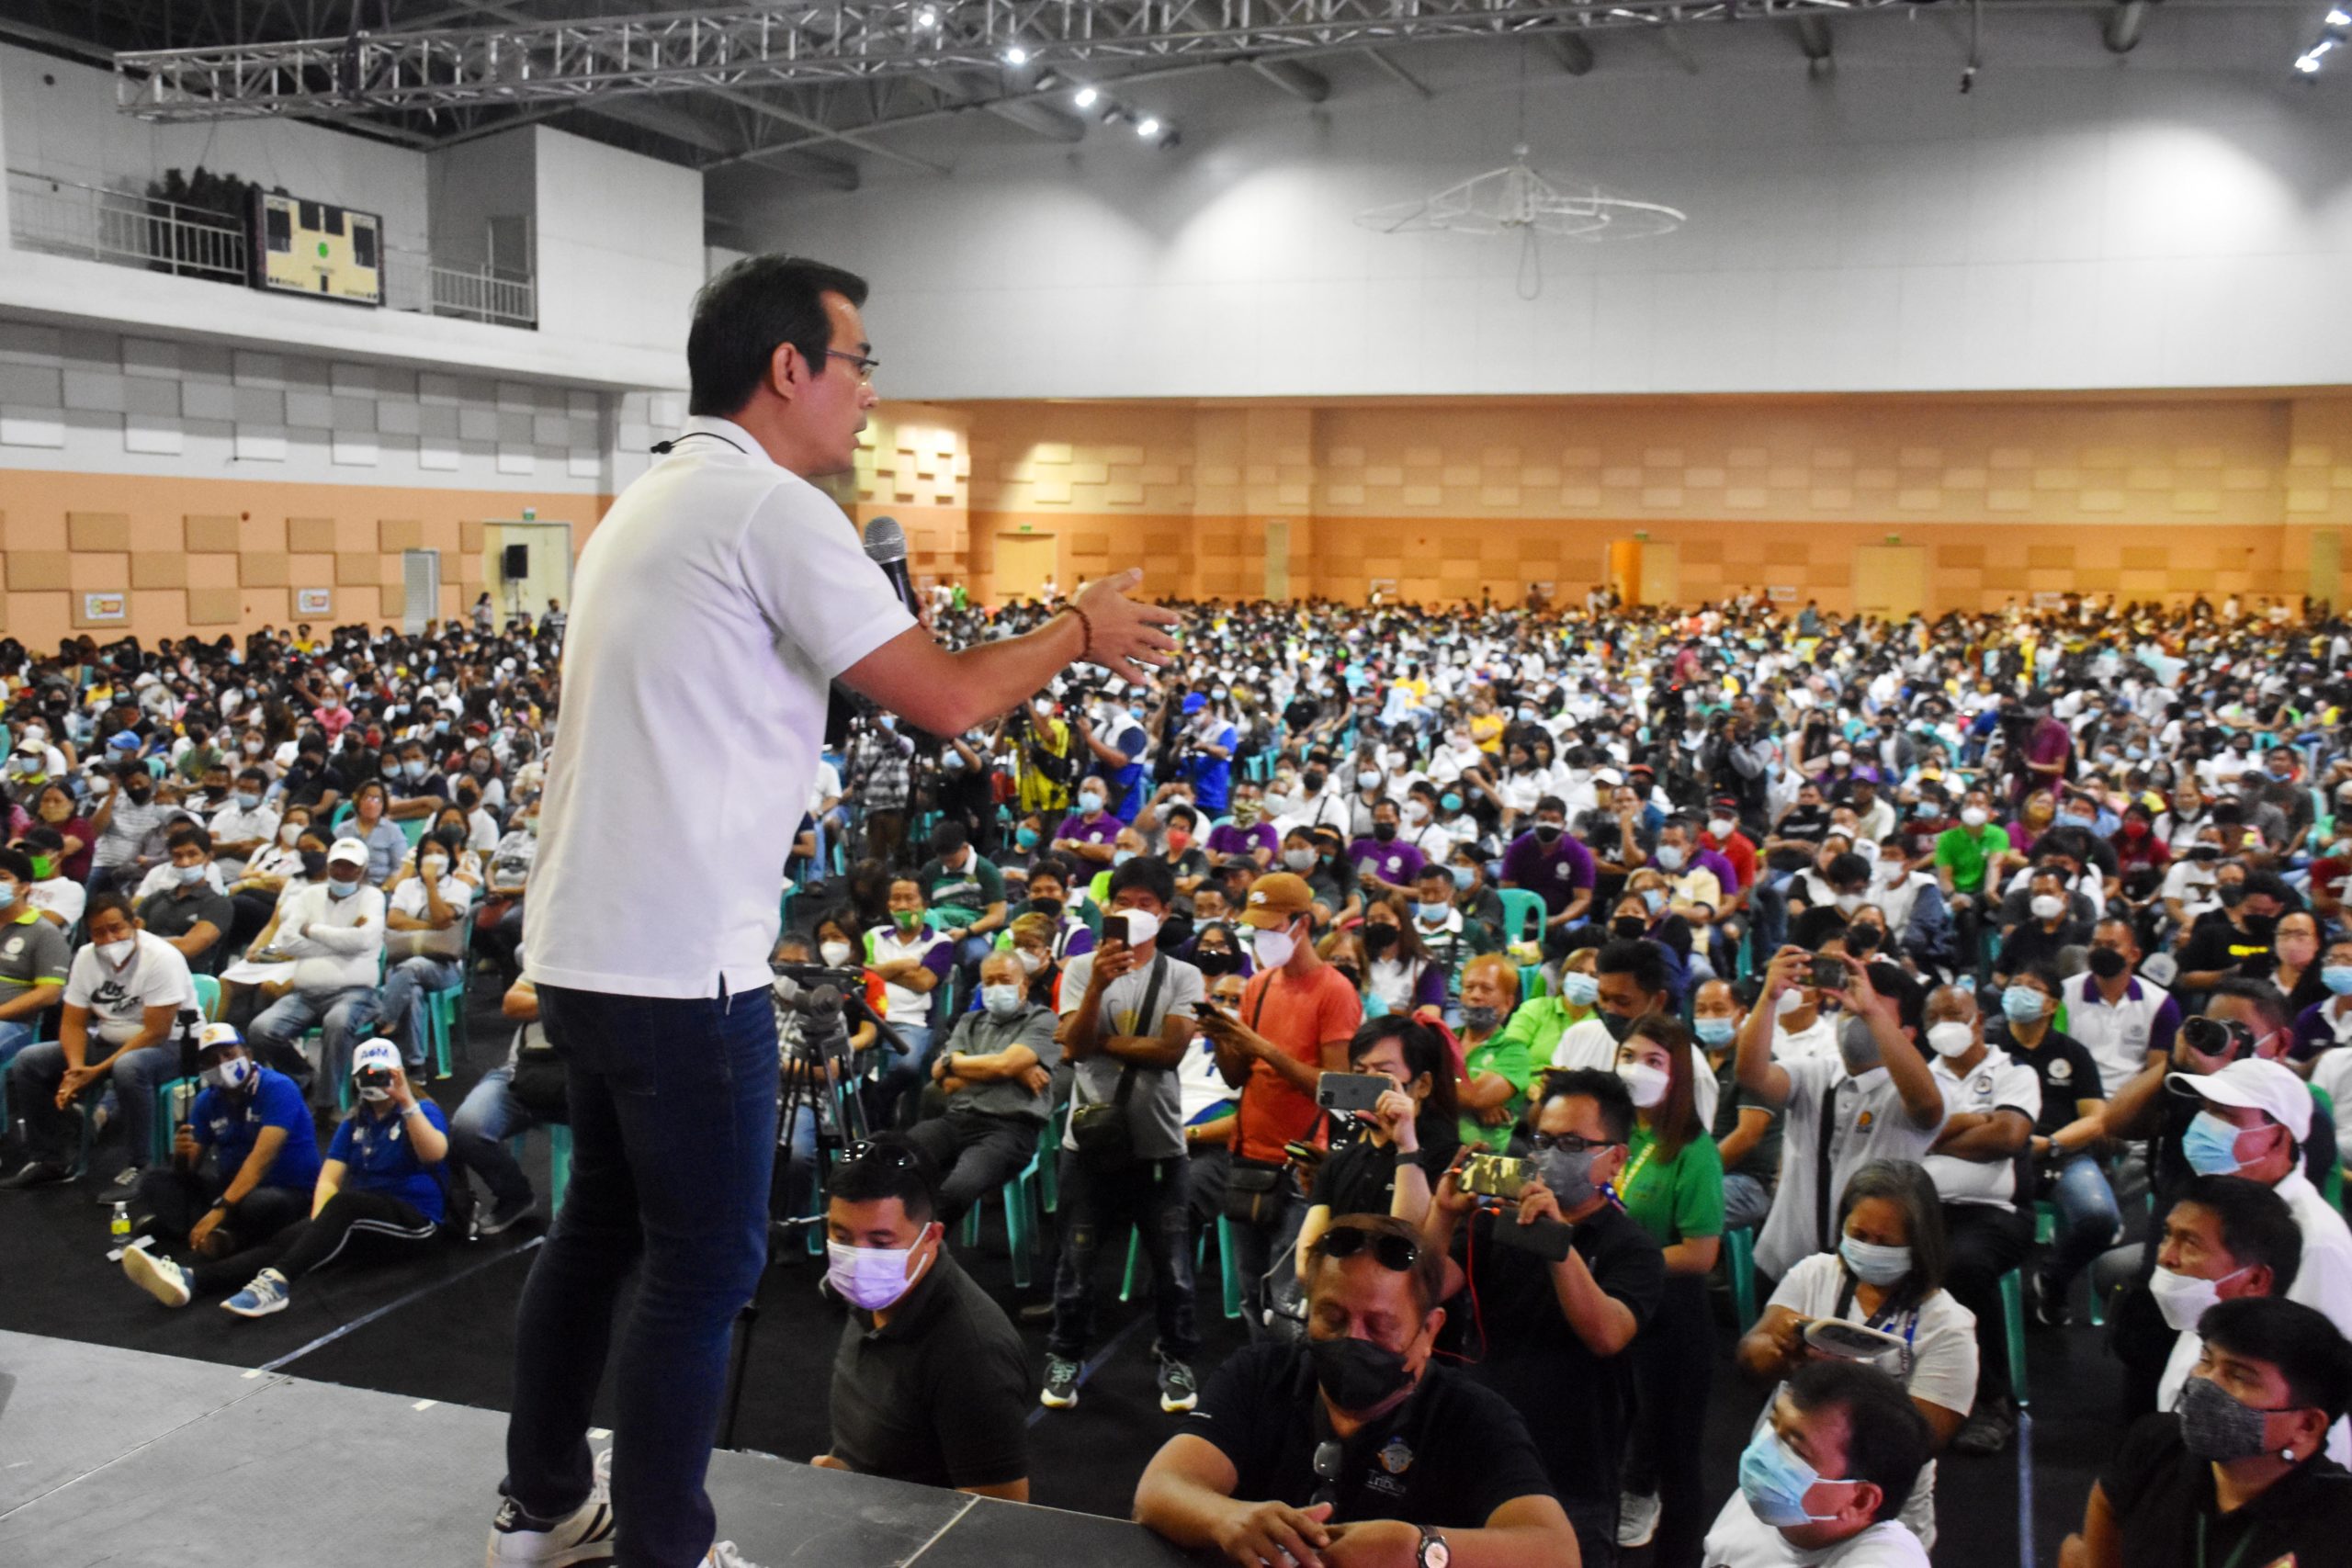 Presidential candidate Isko Moreno on Friday (Feb. 18) courted residents in vote-rich Pangasinan province and was given a warm welcome in all of the towns he visited.